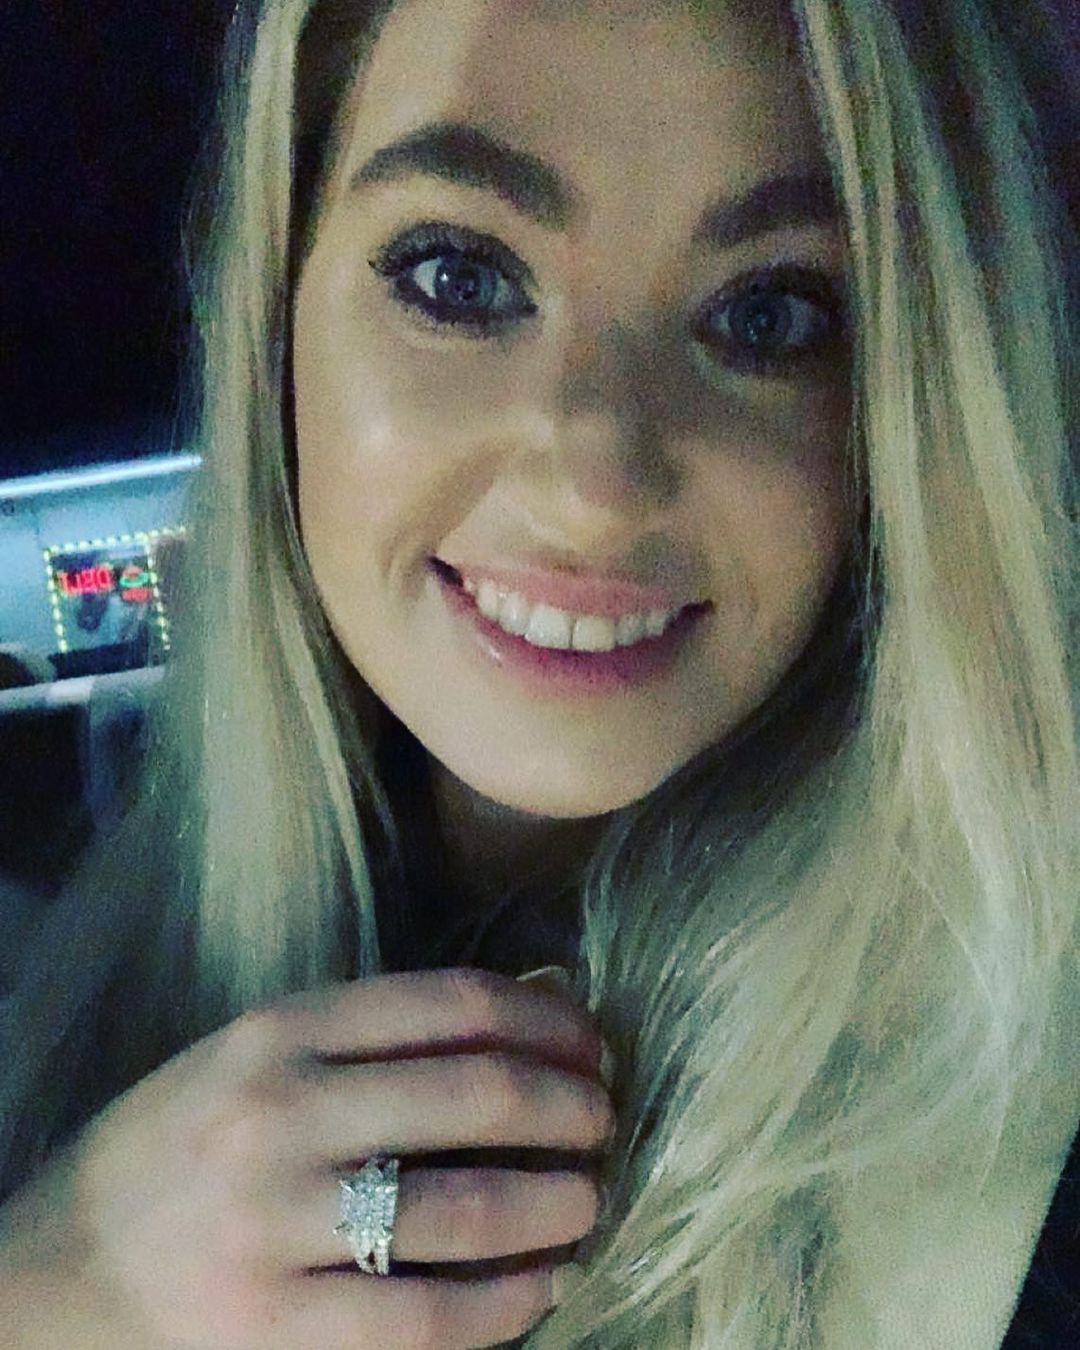 Kyle Chrisley's Wife, Nelson showing off her engagement ring.